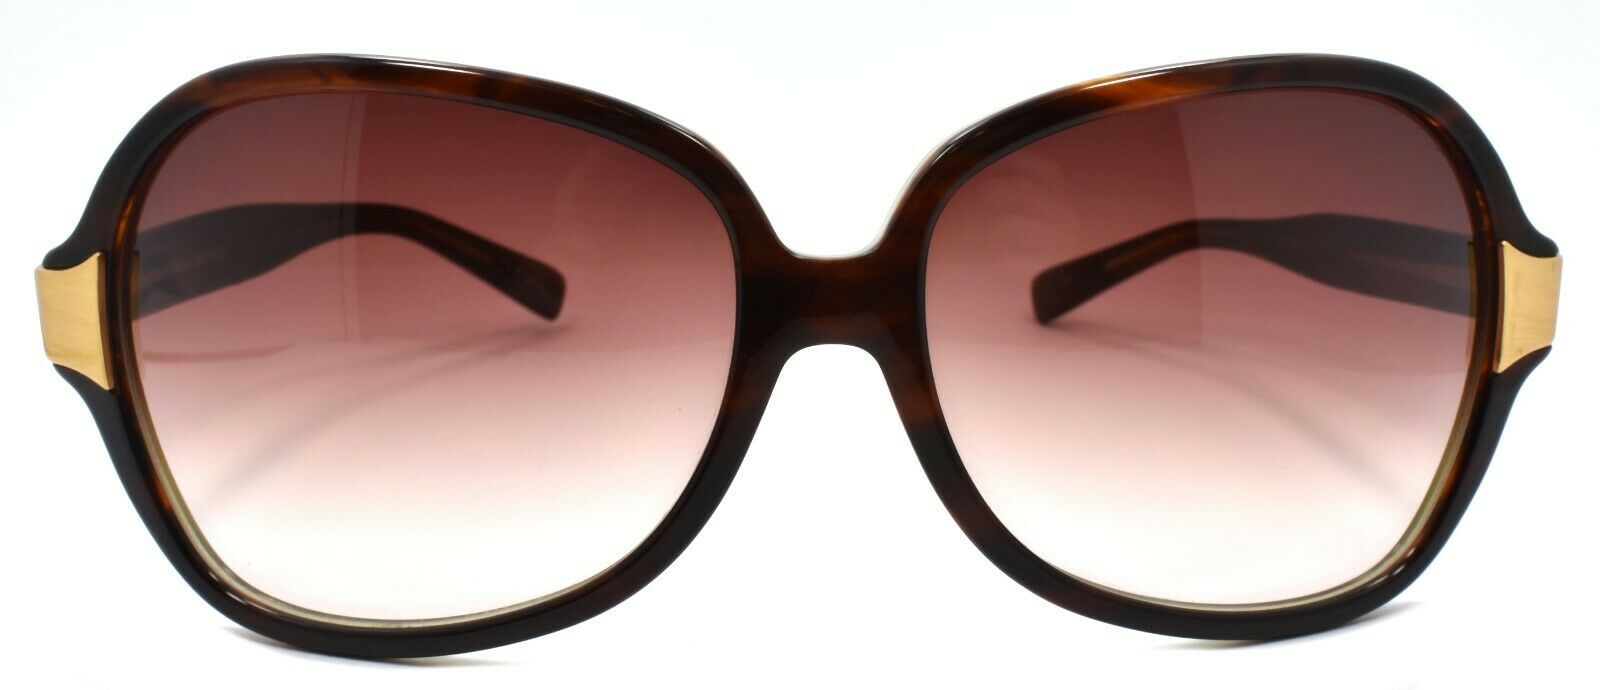 2-Oliver Peoples Leyla H Women's Sunglasses Brown Over Green / Brown Gradient &-Does not apply-IKSpecs